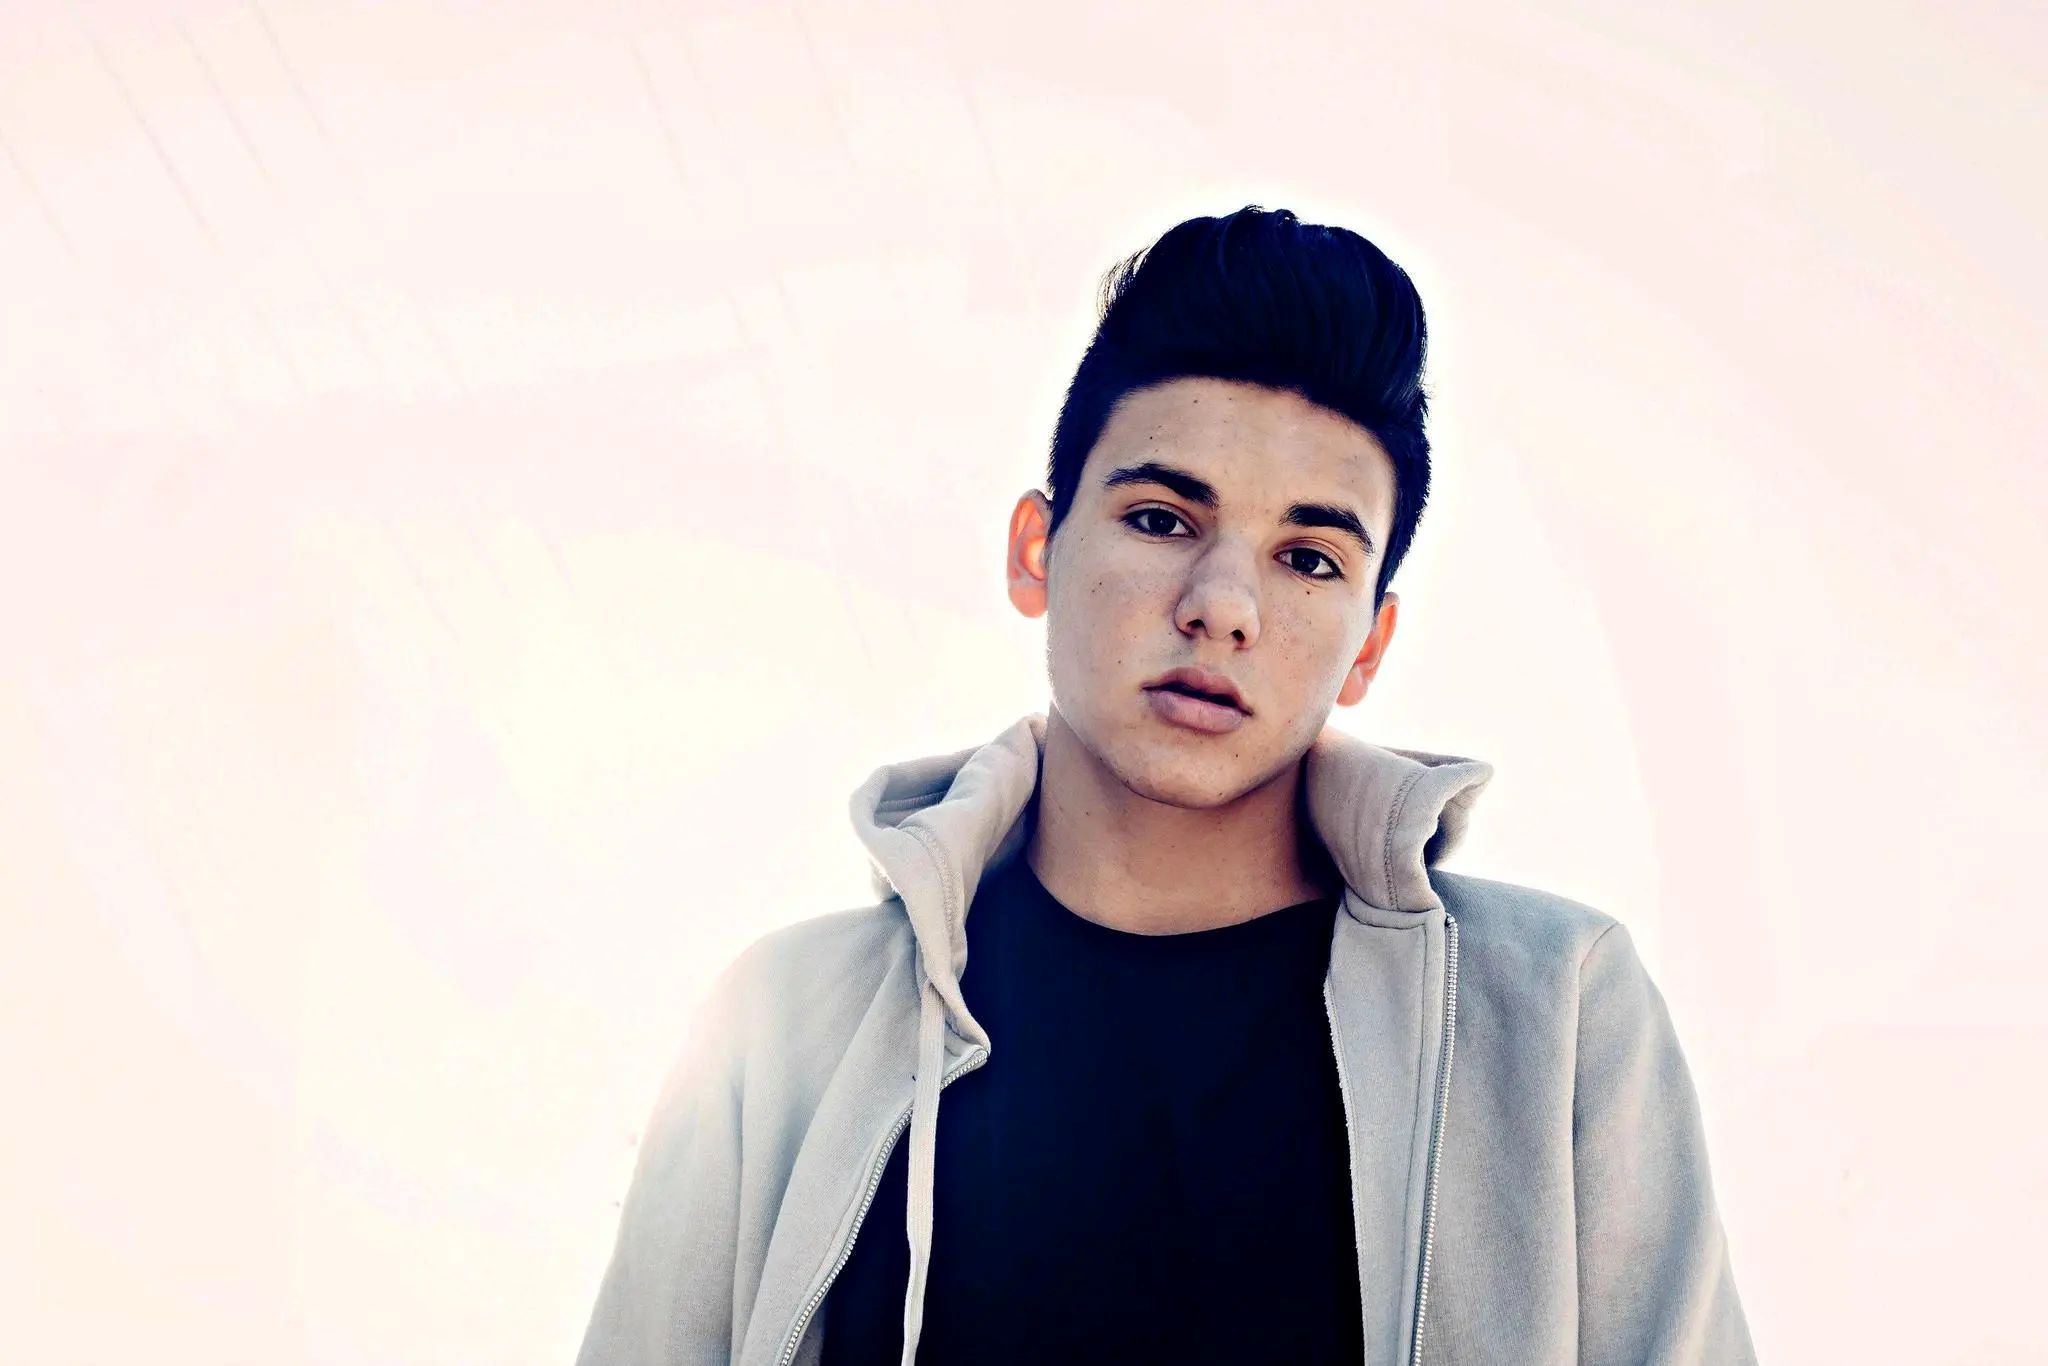 25 Mind-blowing Facts About Daniel Skye - Facts.net